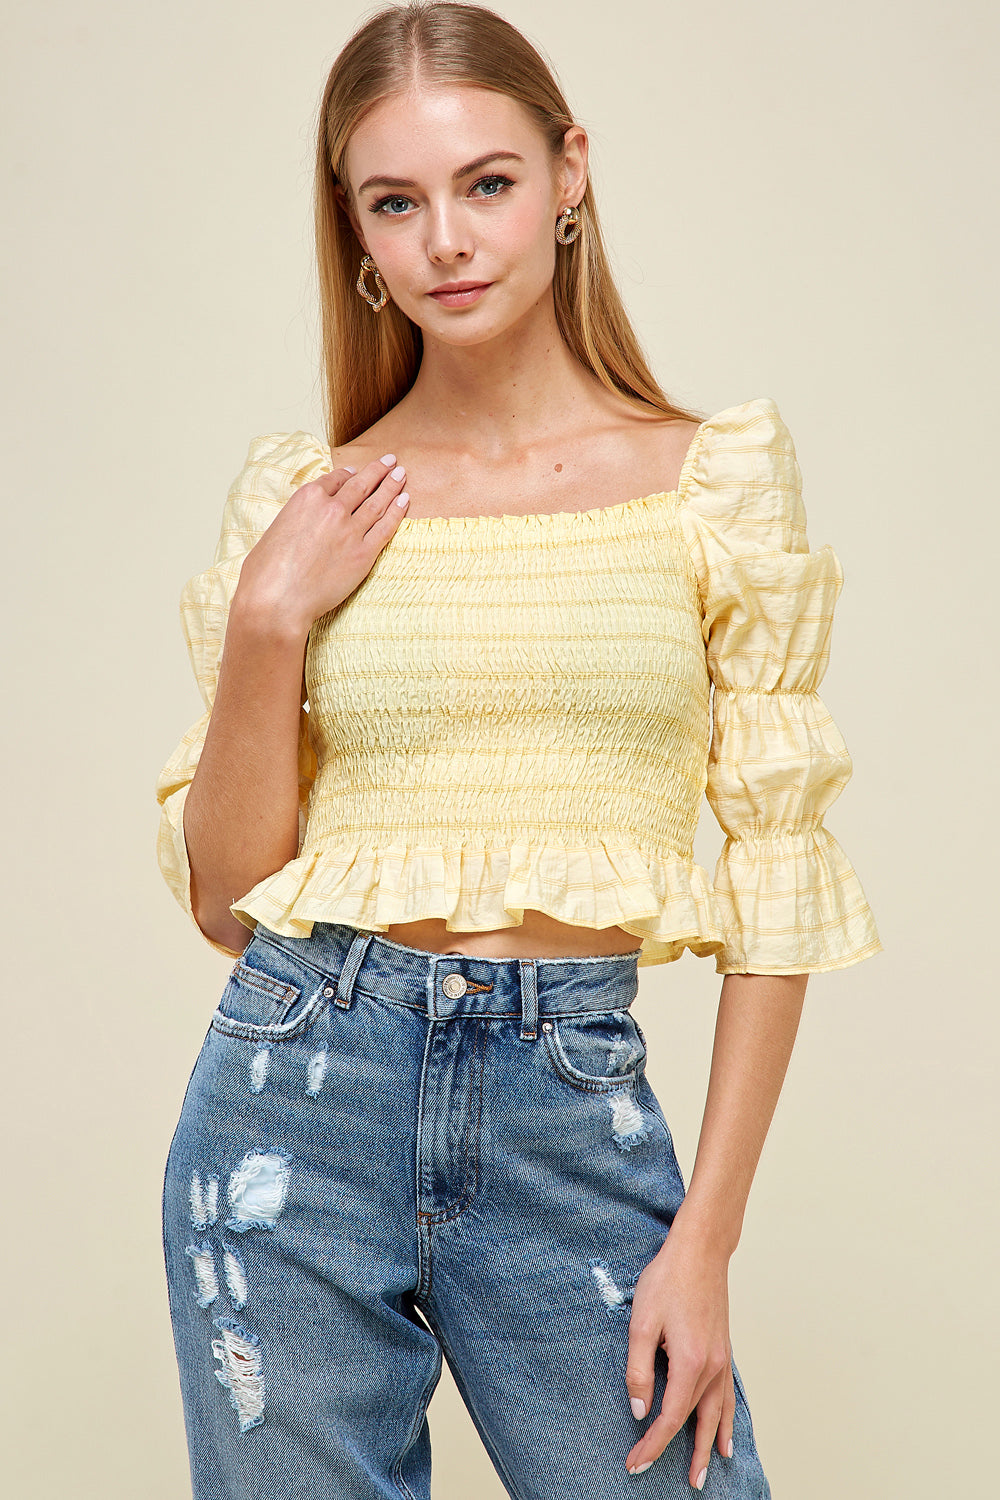 [$4/piece] Puff sleeves smocking top